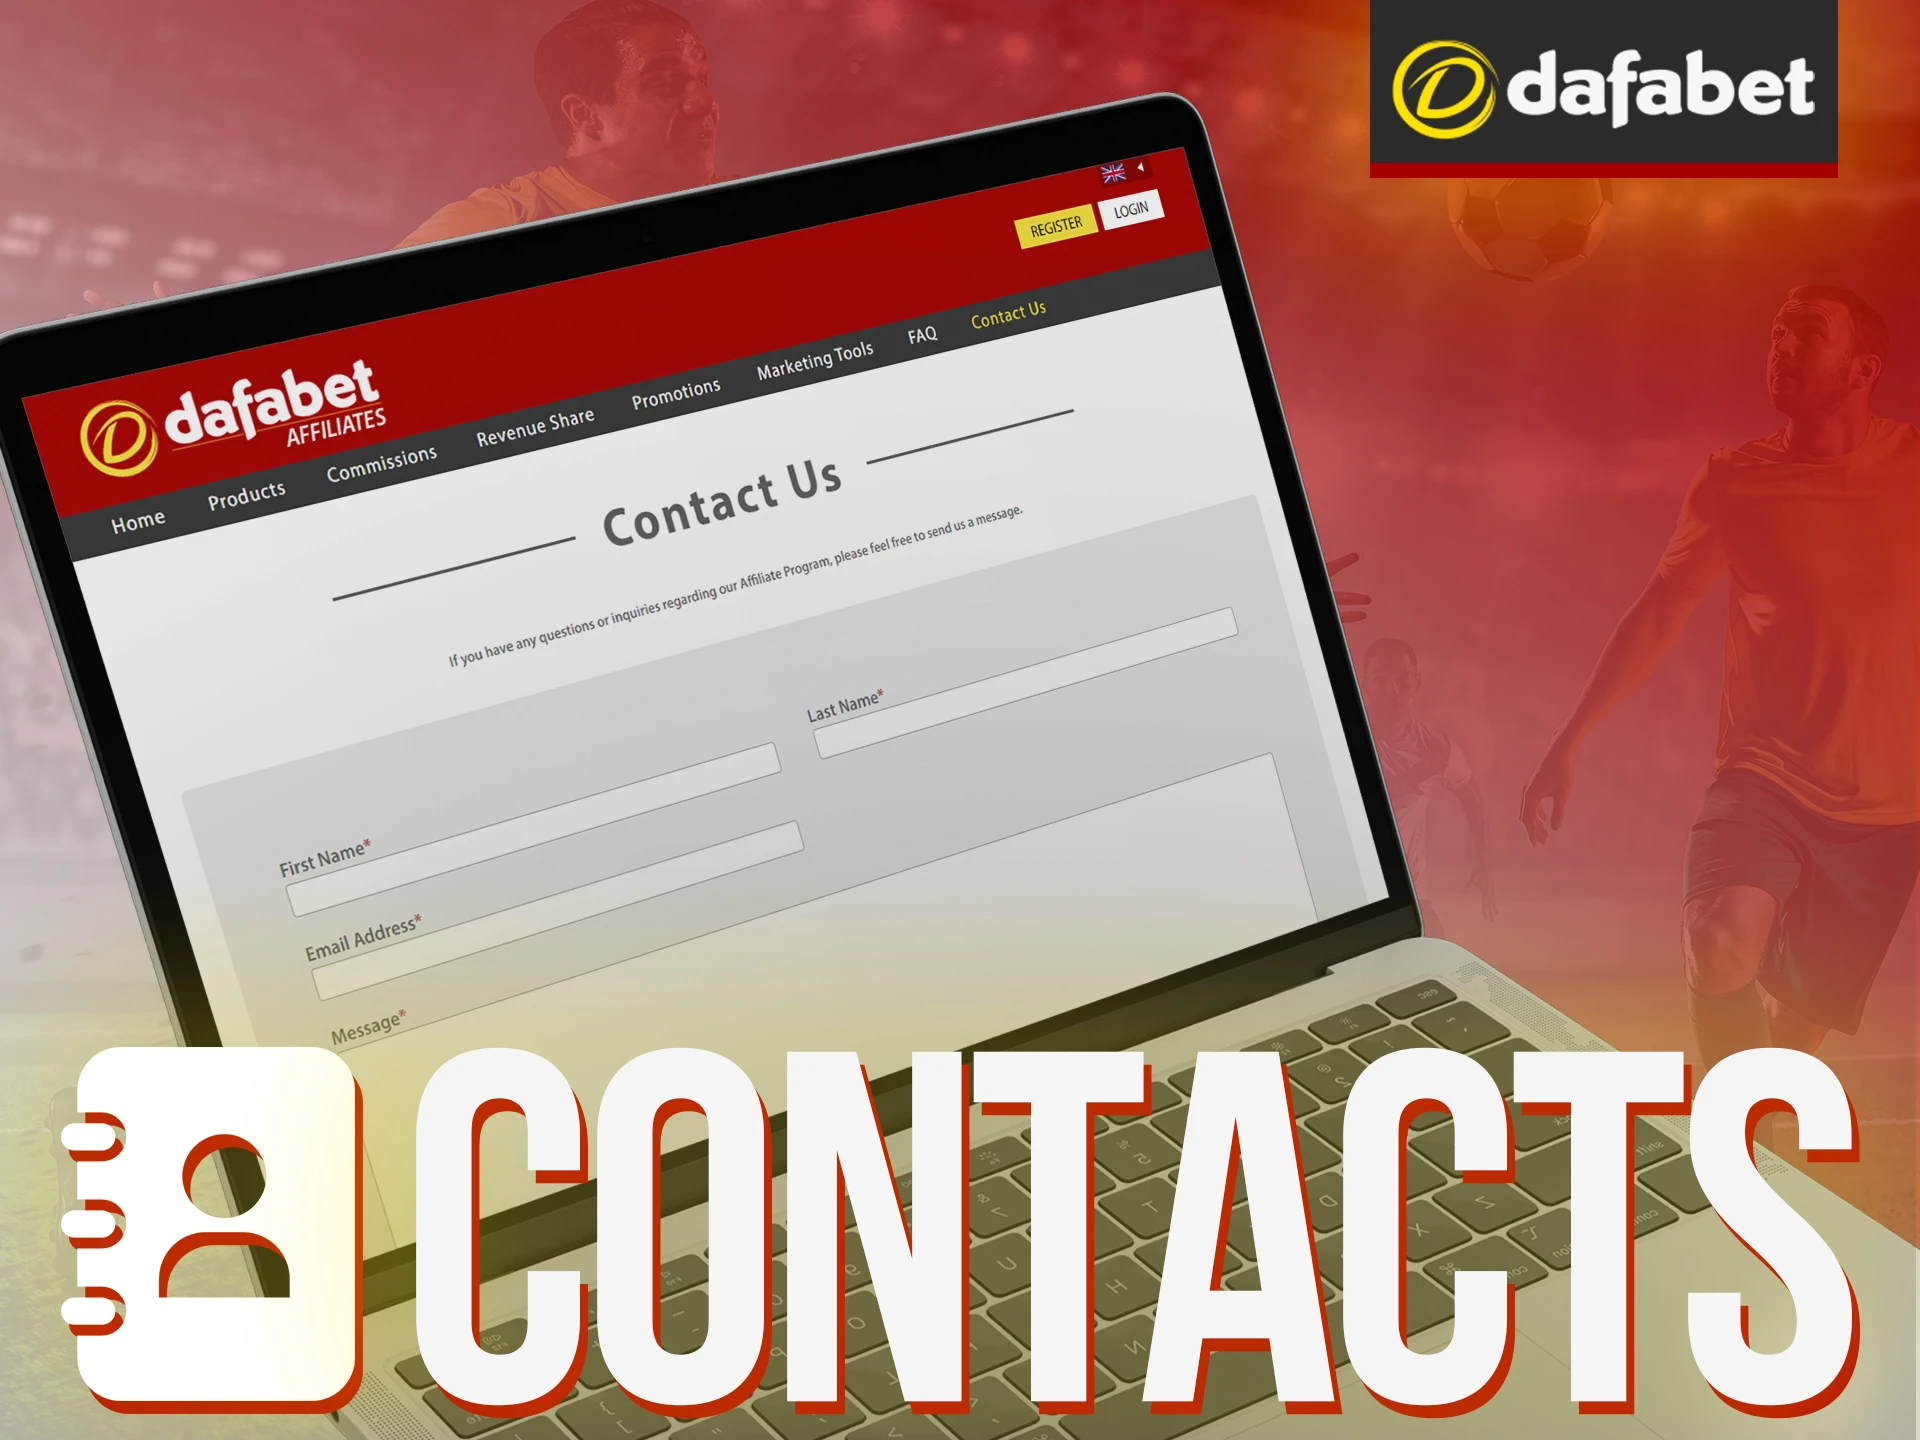 Search for Dafabet contacts for contacting the support.